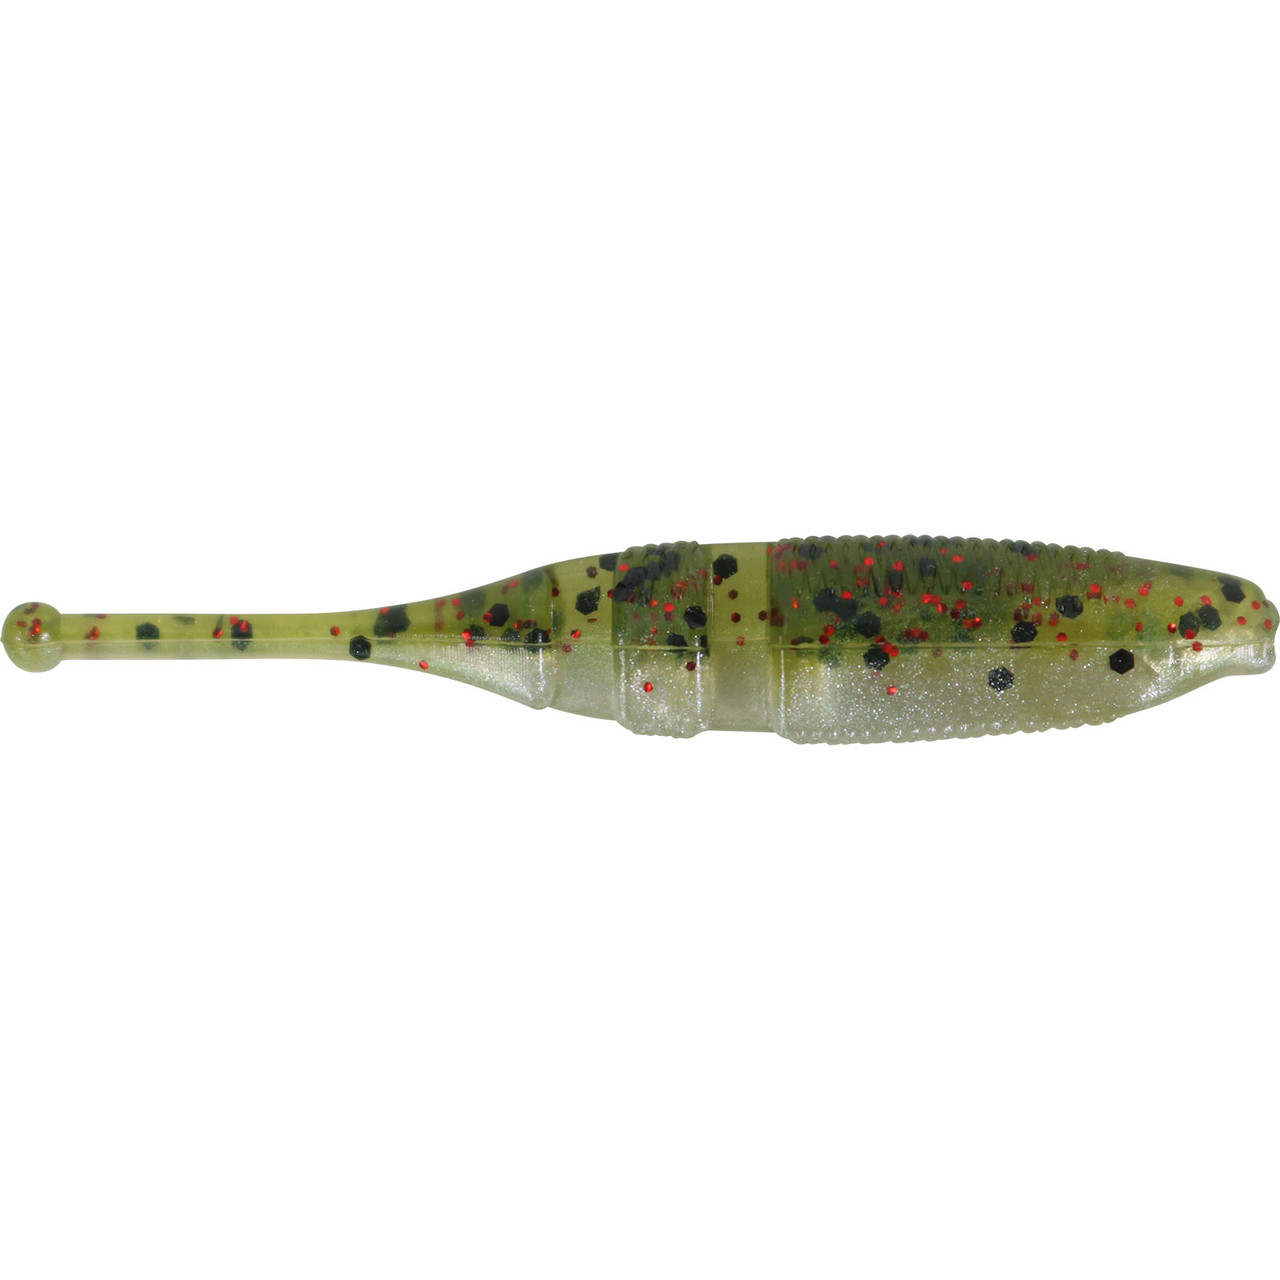 https://cdn11.bigcommerce.com/s-s2ydjd5yv9/images/stencil/1280x1280/products/13375/46555/F21174_Live_baby_shad_swimbait_Watermelon_Red-Pearl__95776.1704310411.jpg?c=1